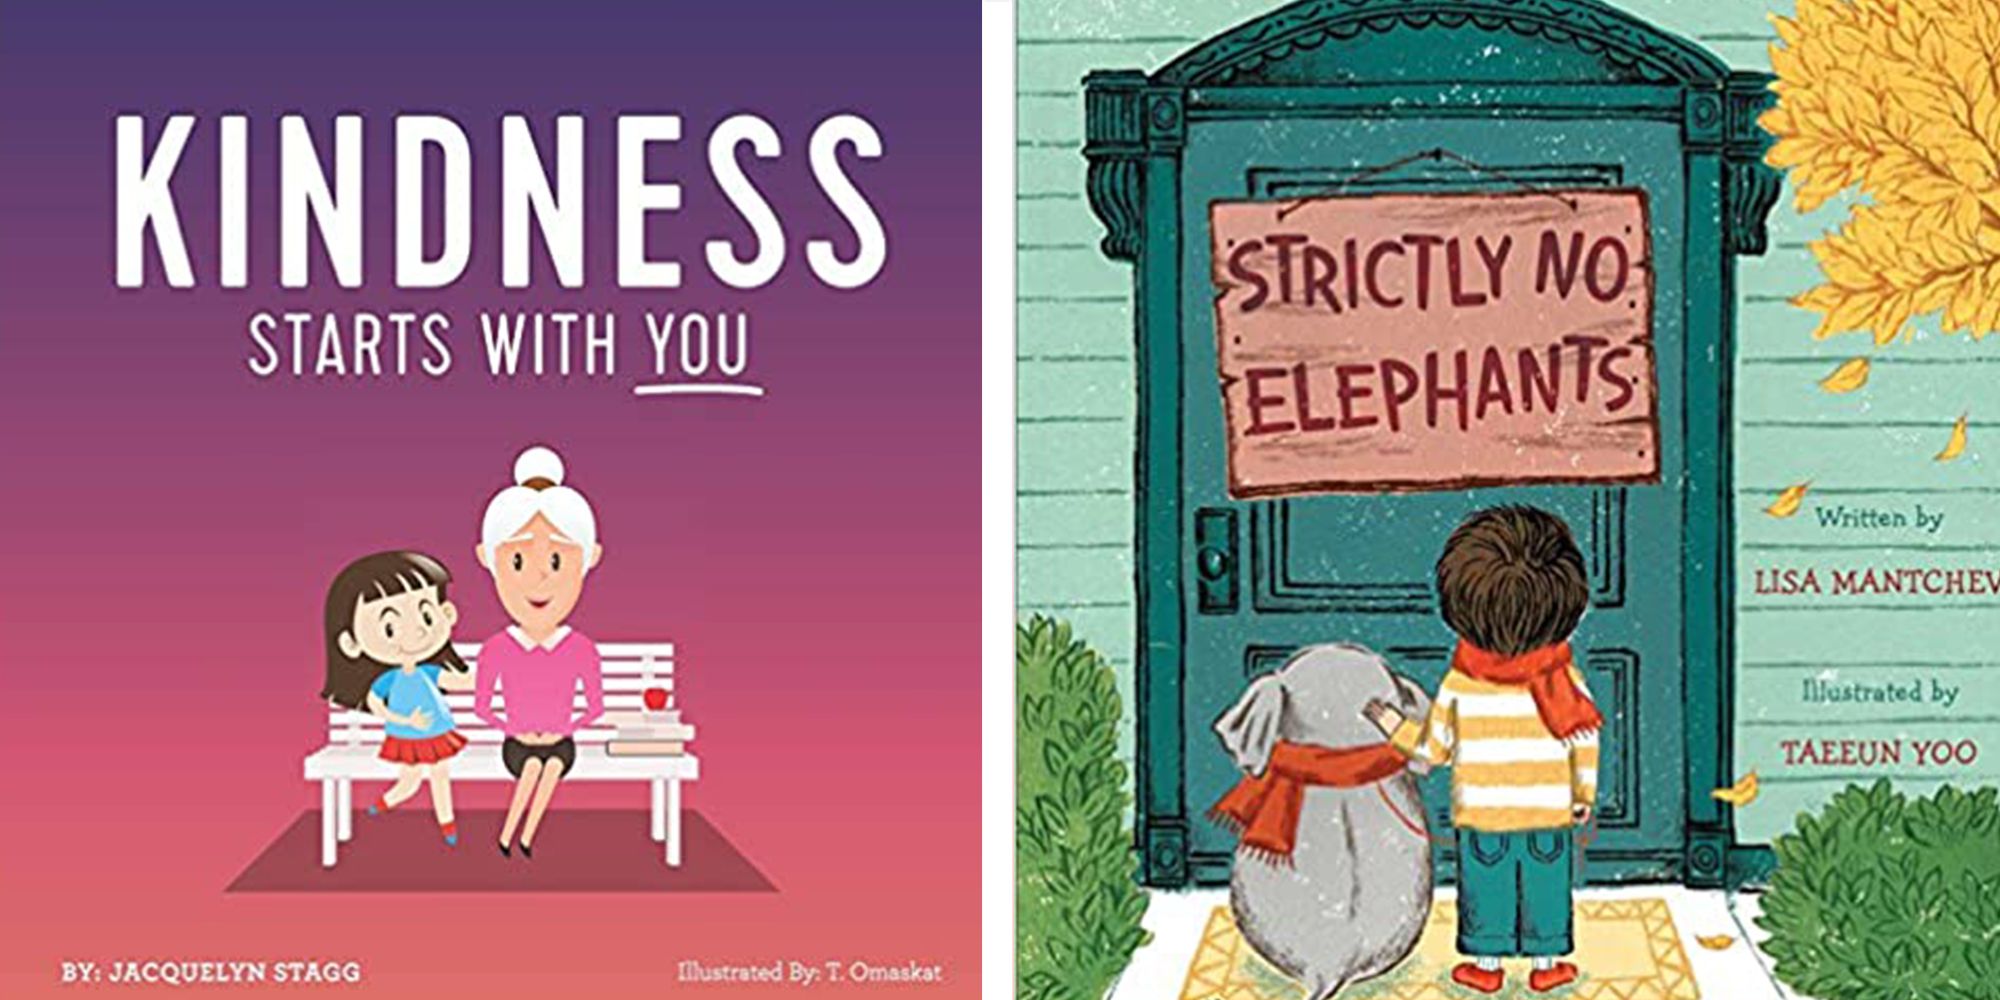 17 Kids' Books That Teach Kindness — Best Kid Books About Compassion